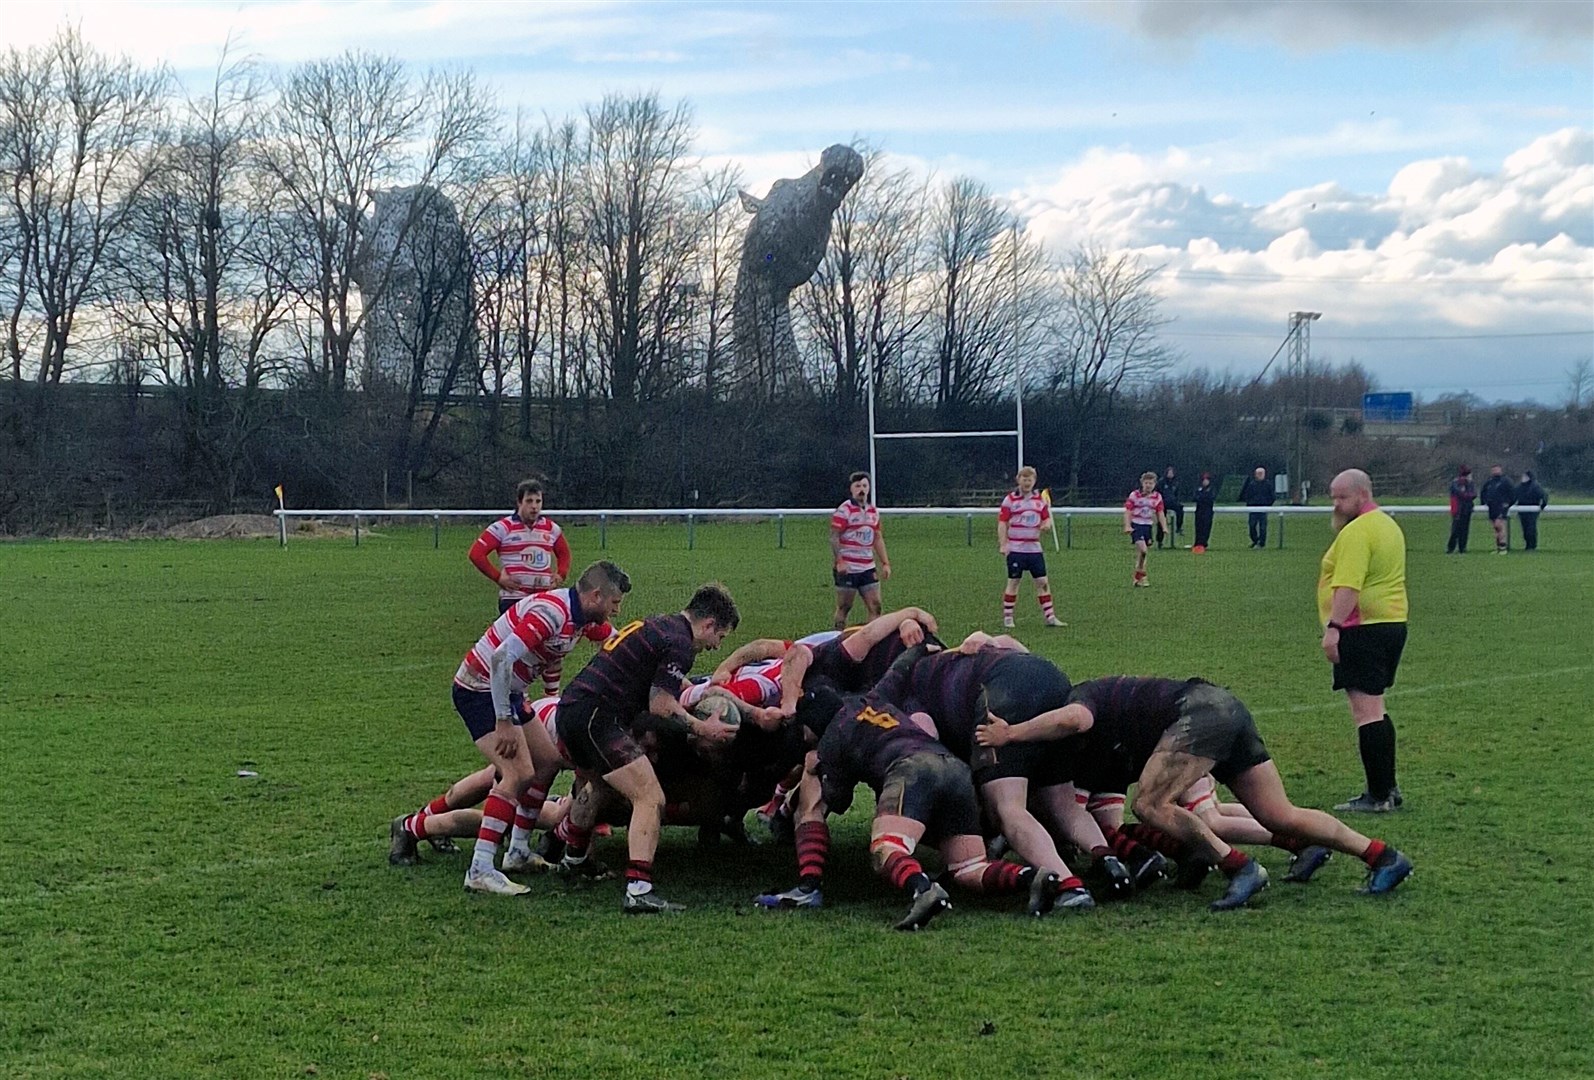 Scrum with Kelpies looking on in background. Picture: Grant Mitchell